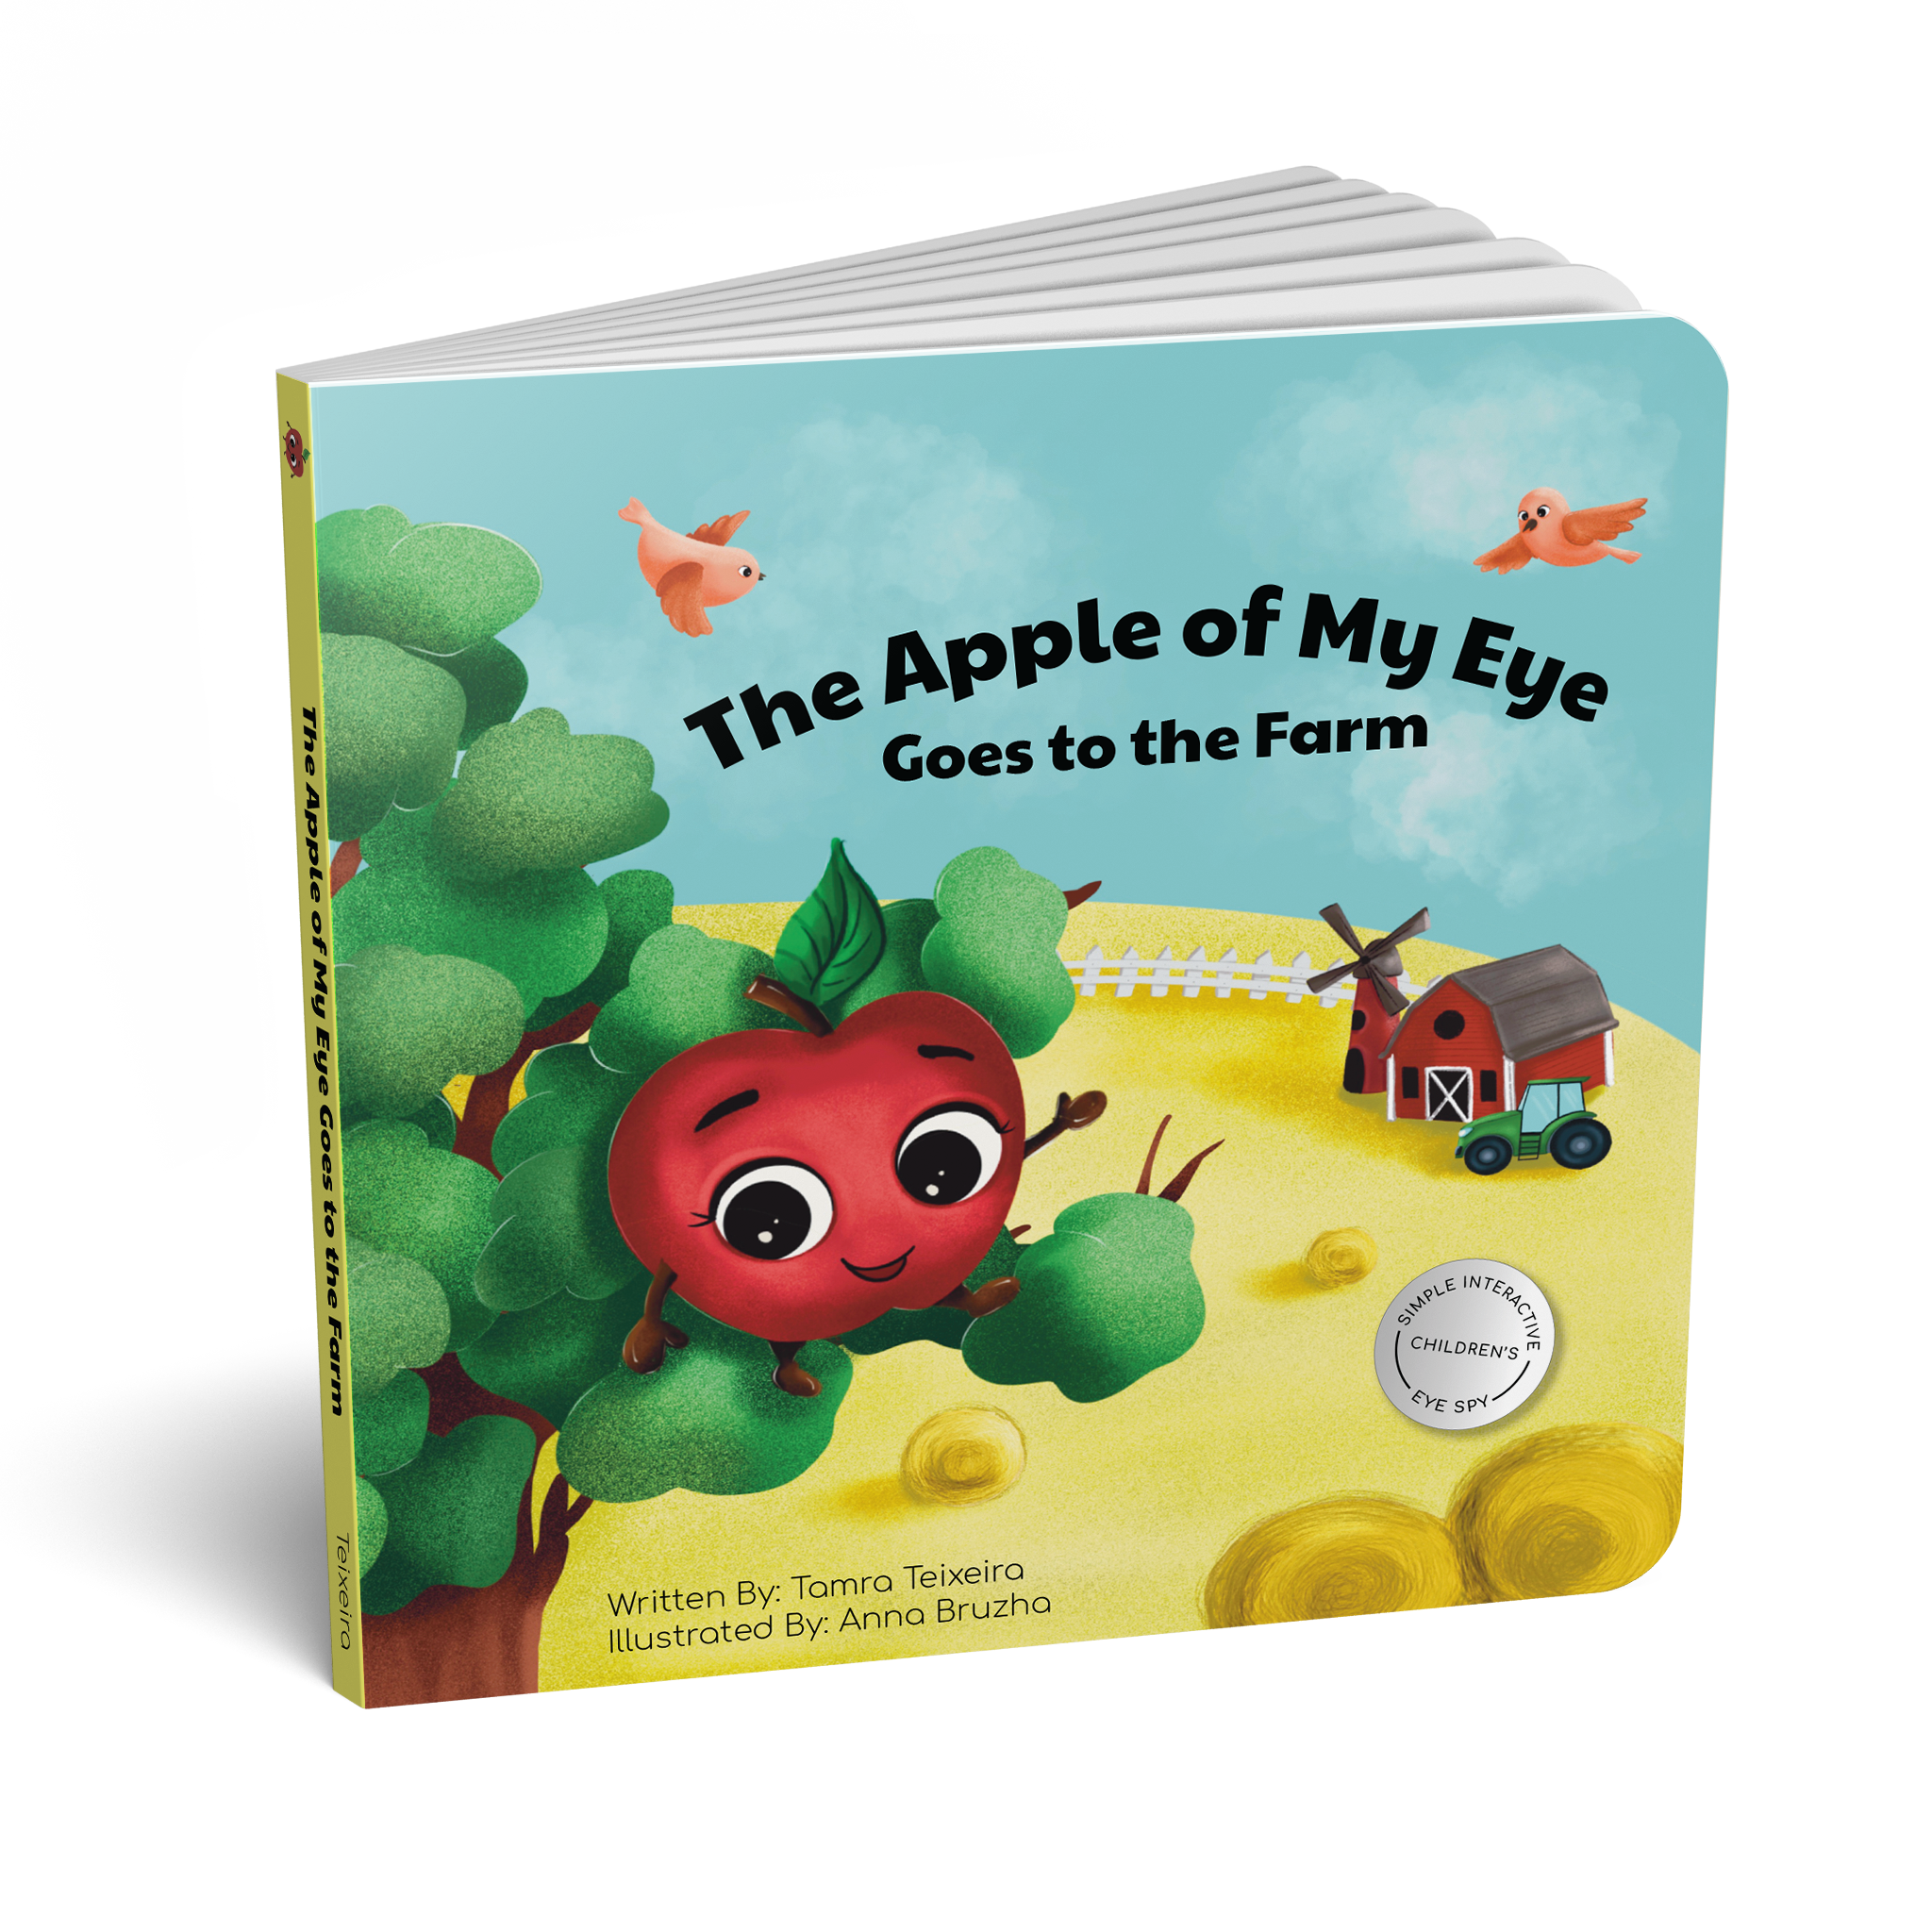 The Apple of My Eye Goes to the Farm